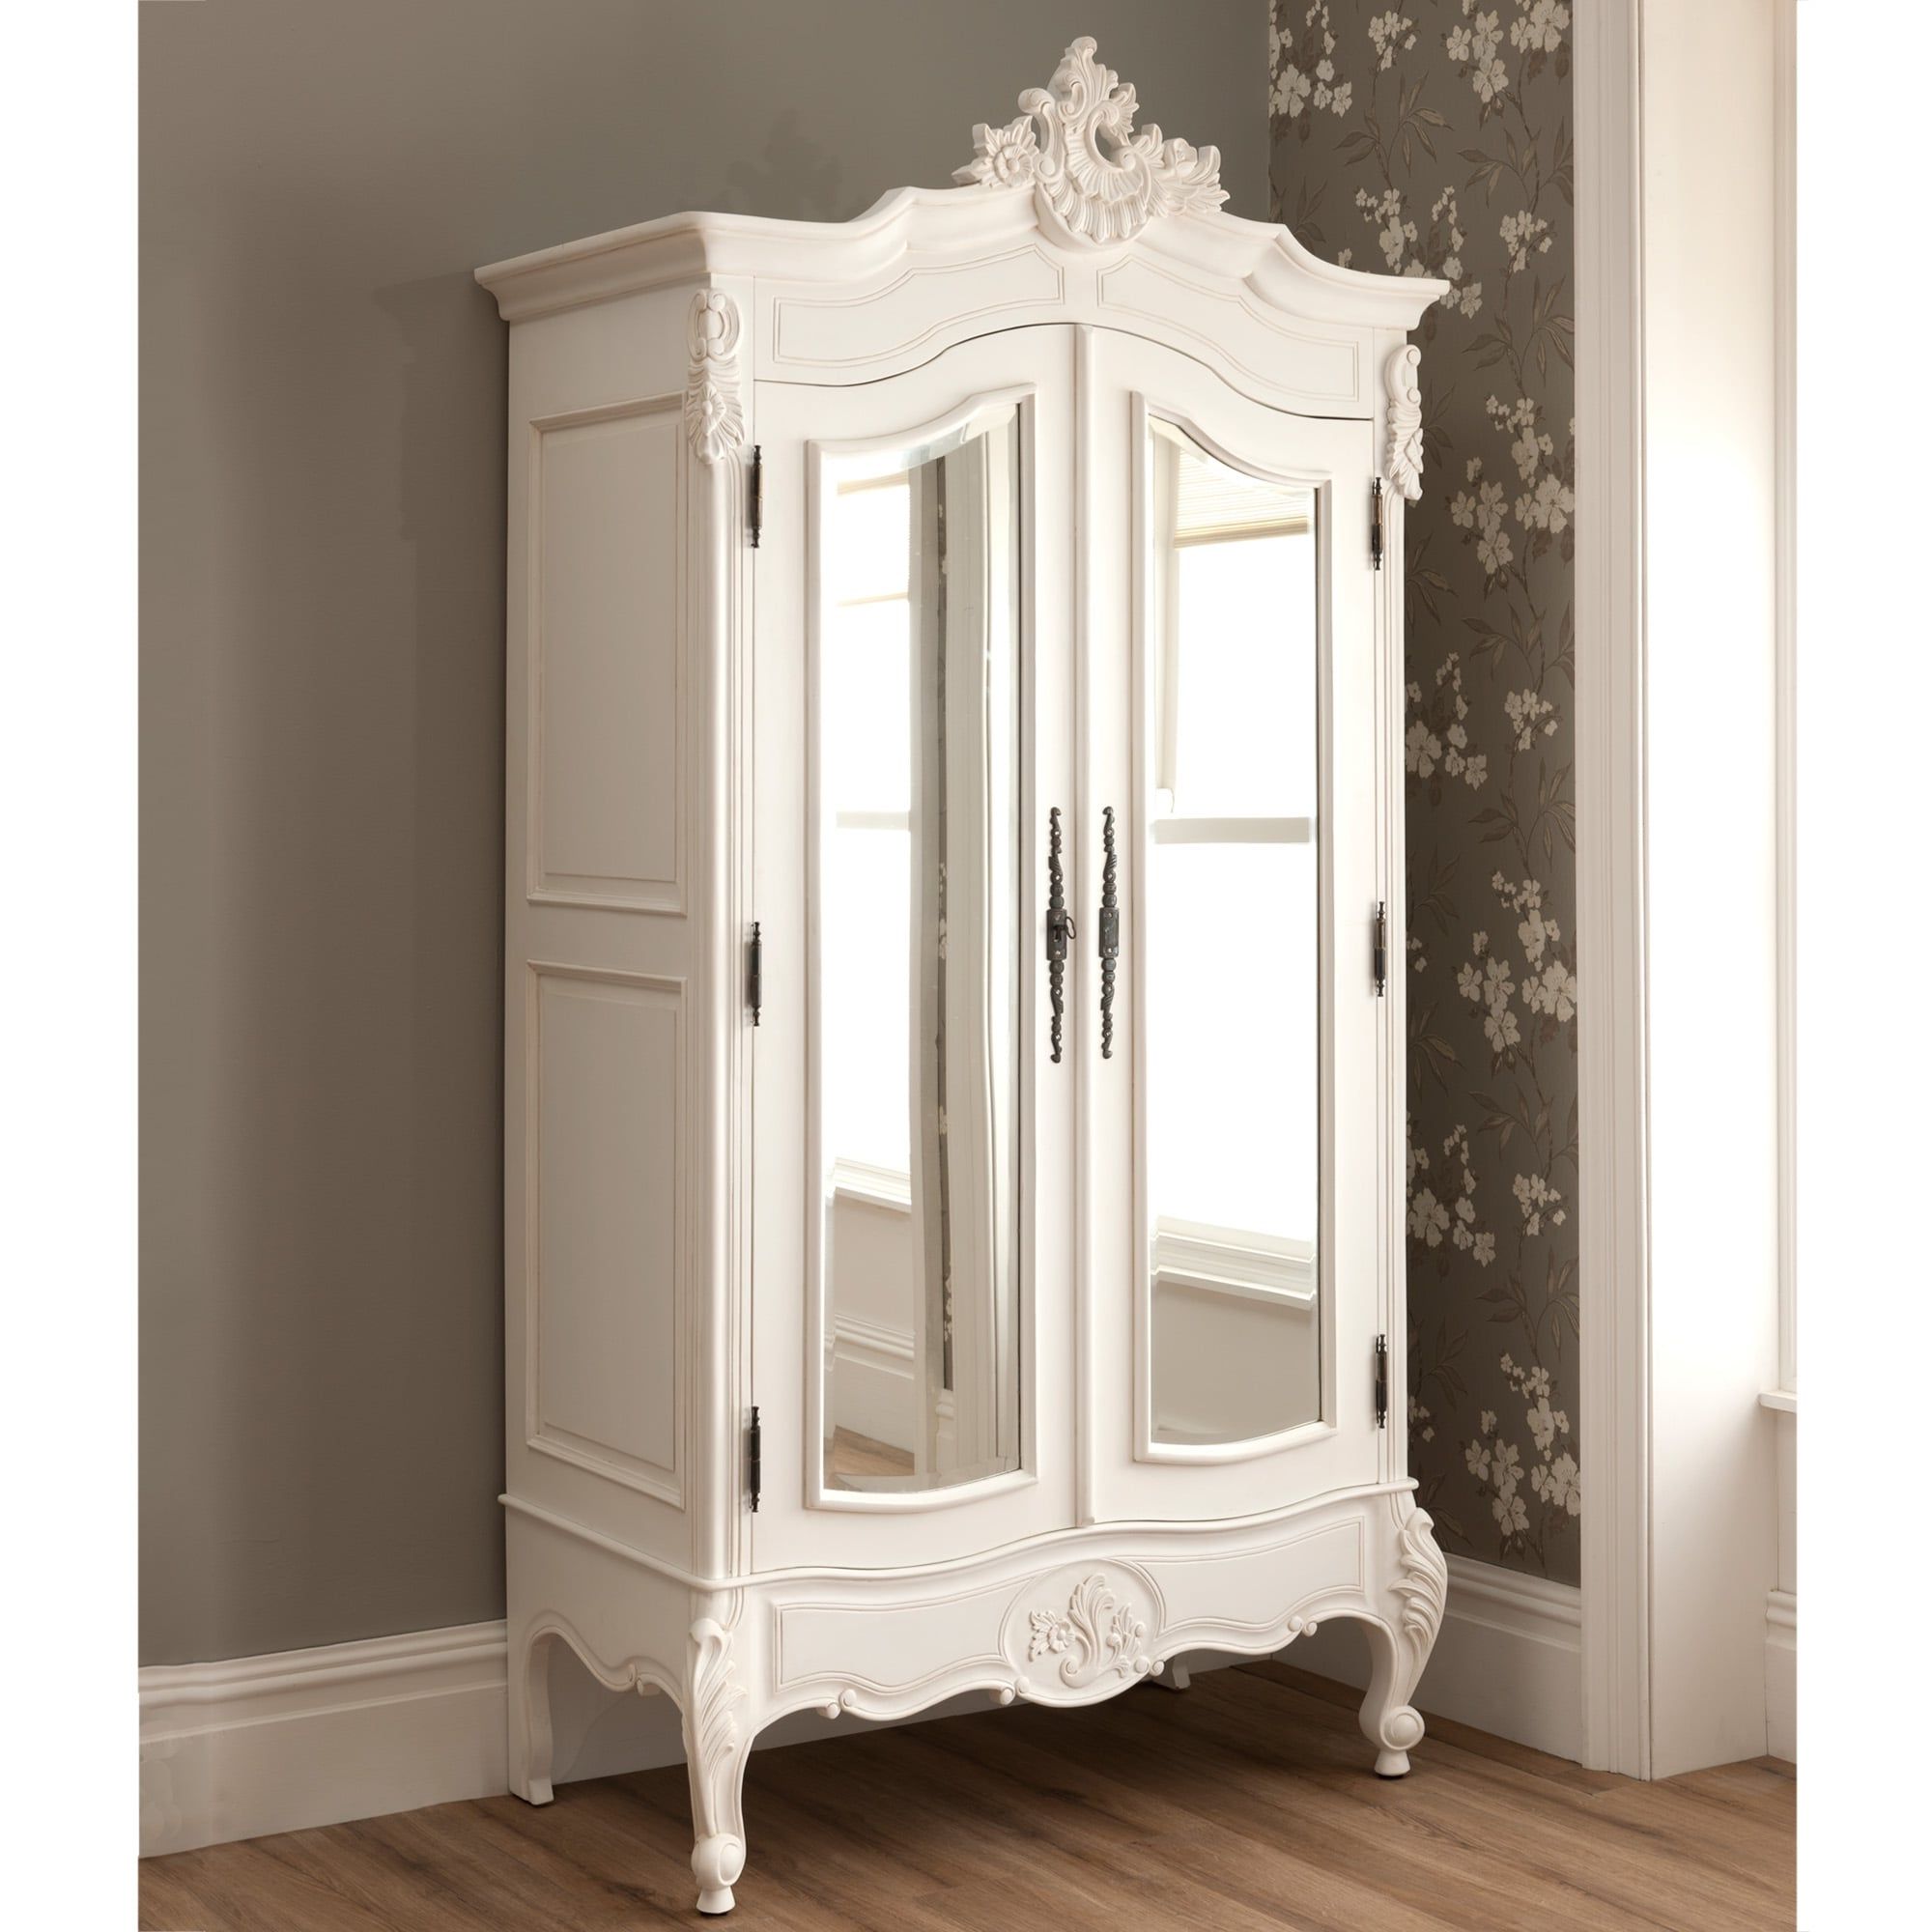 La Rochelle Antique French Mirrored 2 Door Wardrobe Intended For Antique White Wardrobes (View 13 of 20)